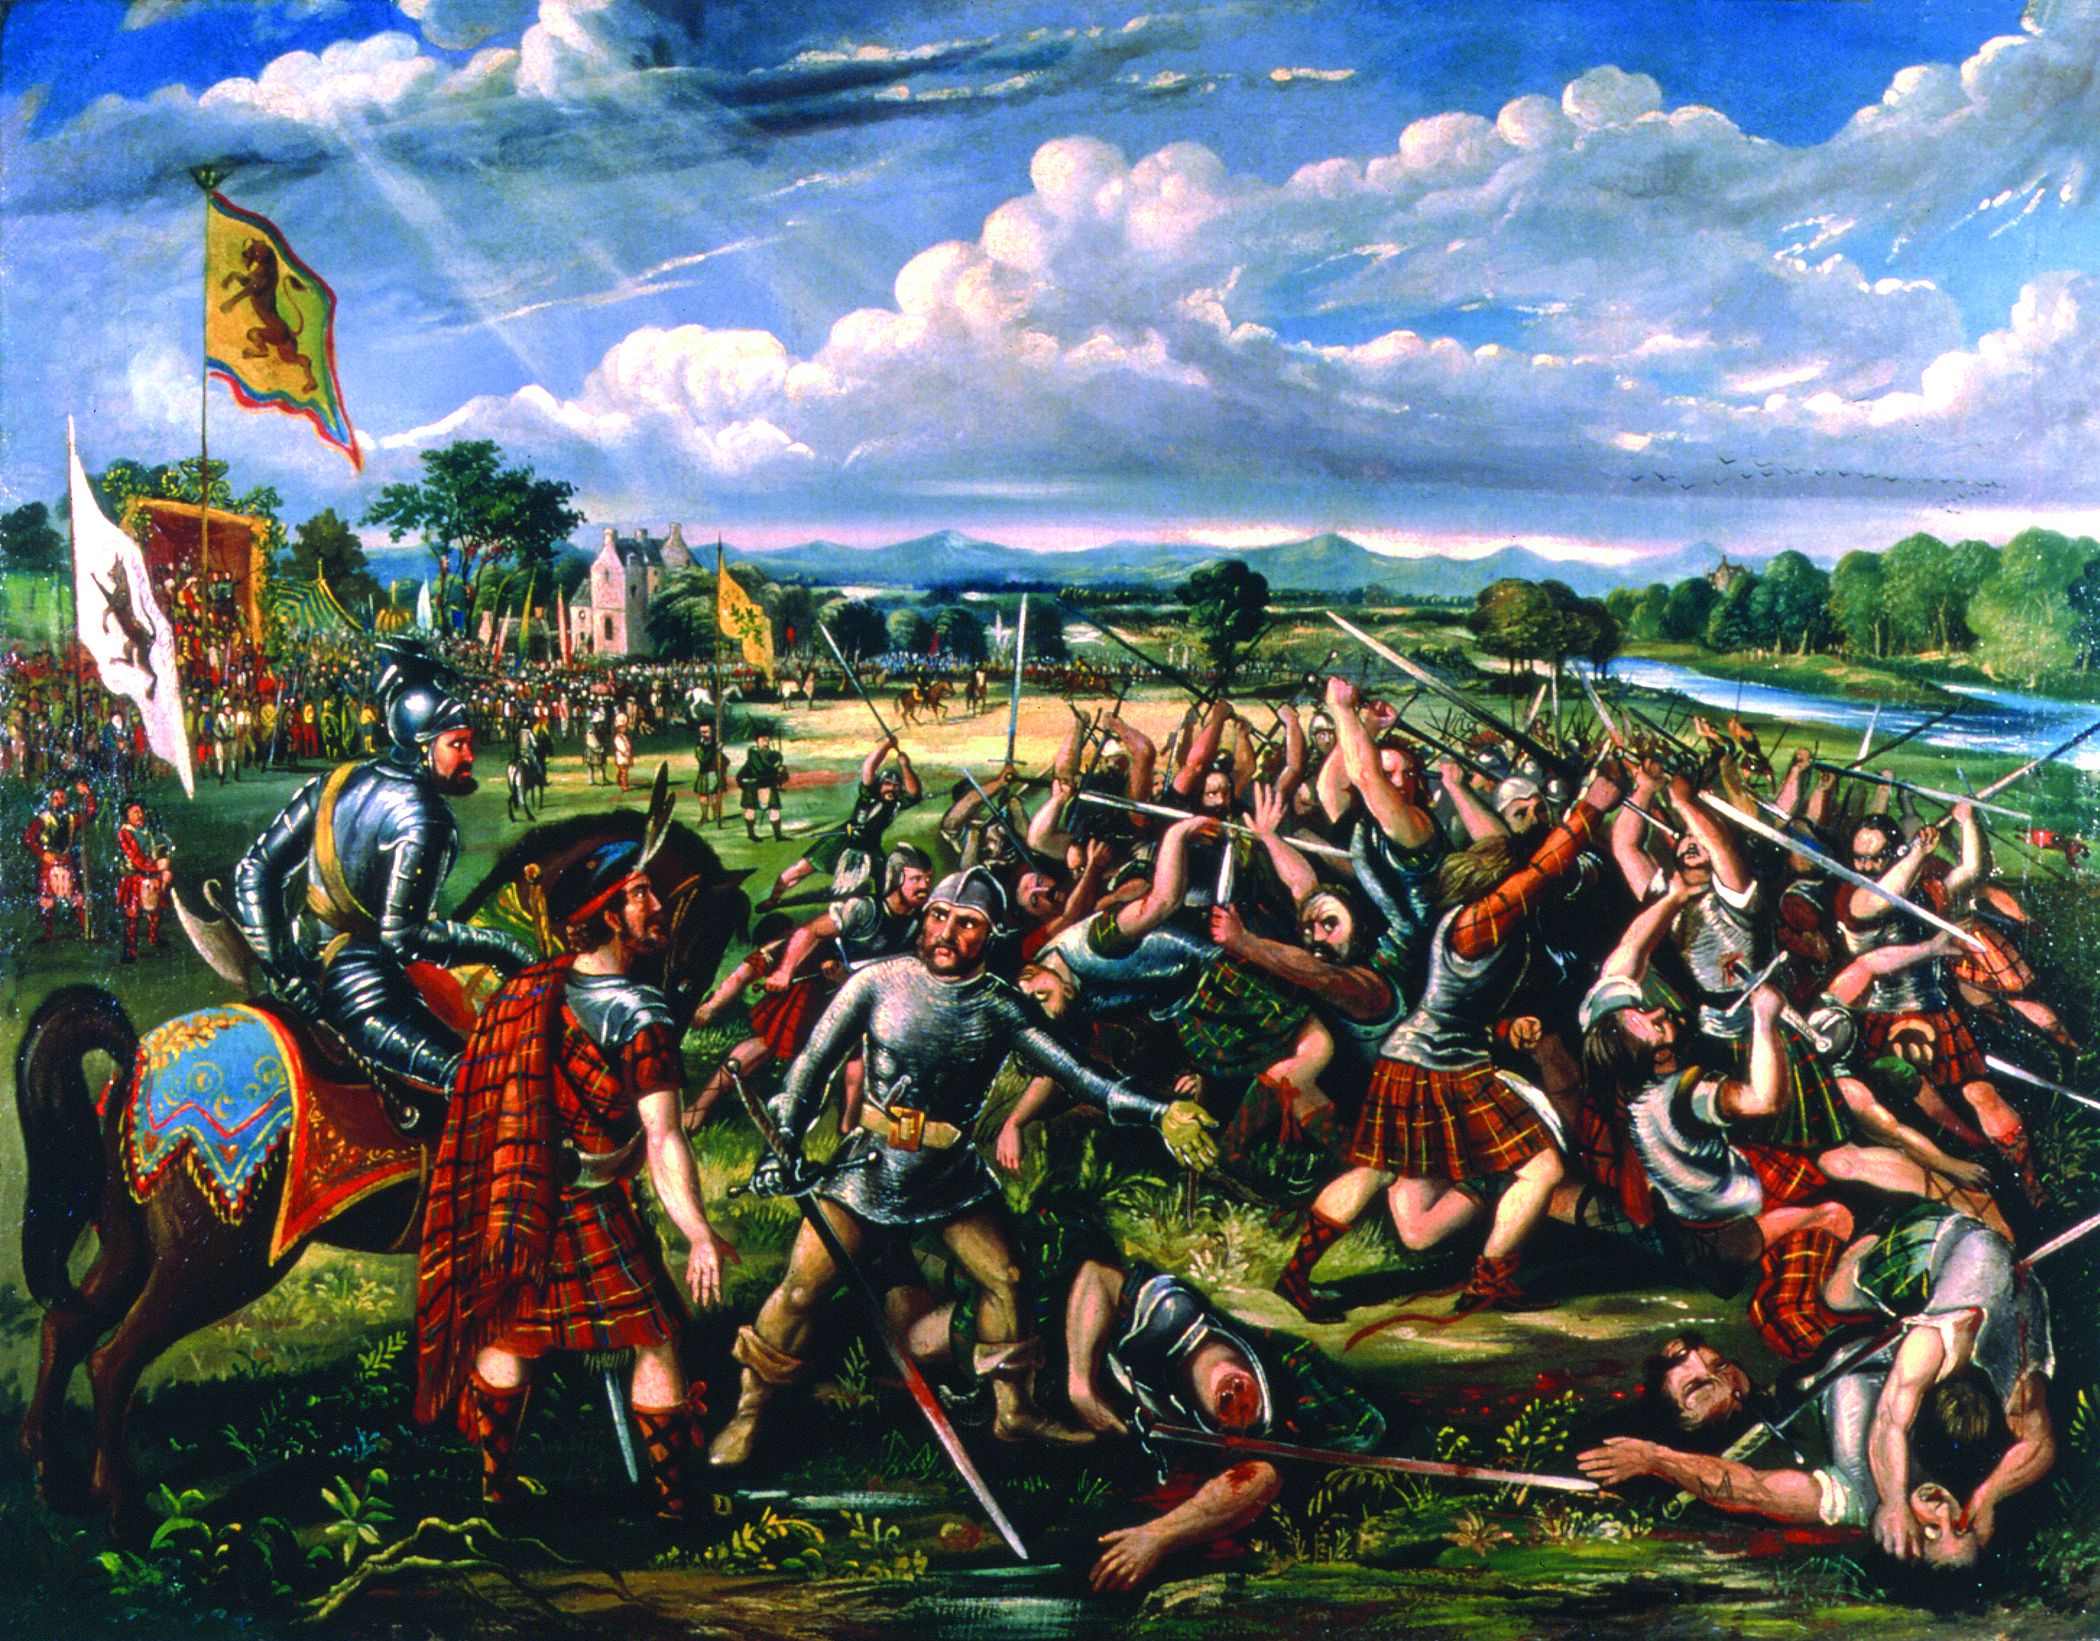 Champions from the long- feuding Clan Chattan and Clan Cameron resolve their differences the Scottish way during the Battle of the Clans at North Inch in 1396.